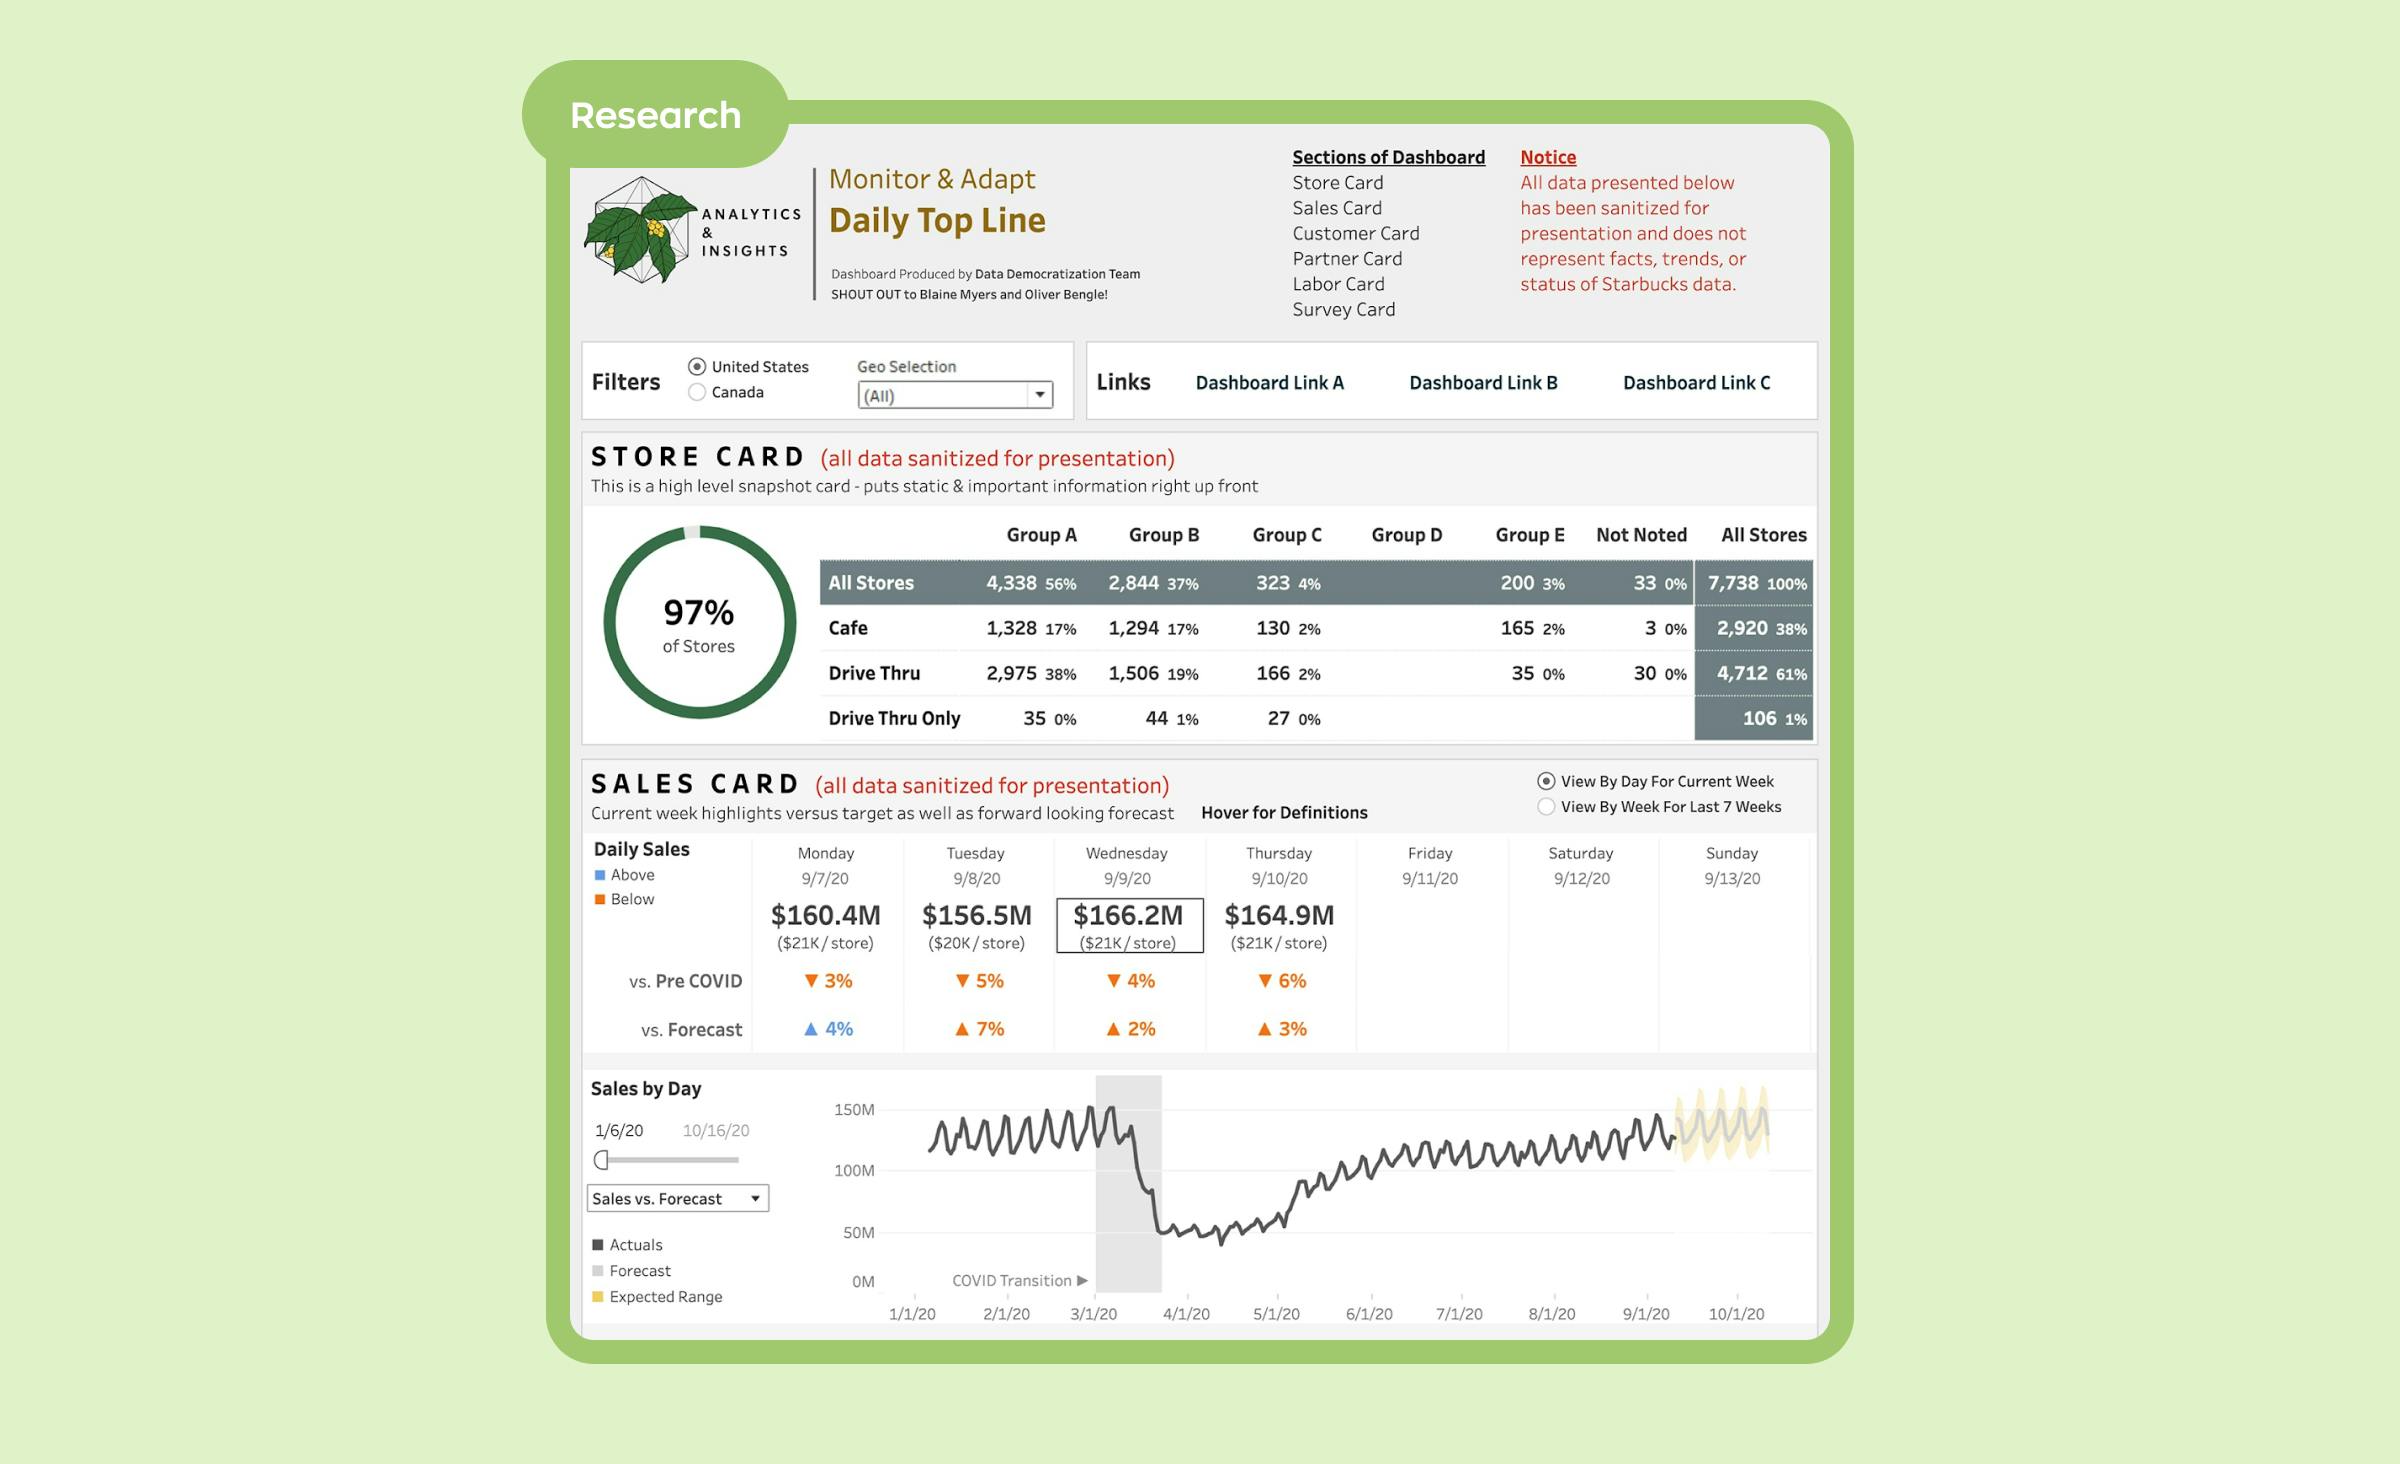 An example of a data visualization report from Starbucks’ customer service research, presenting a series of charts and graphs. This research empowered Starbucks to identify the most popular services among its customers efficiently.